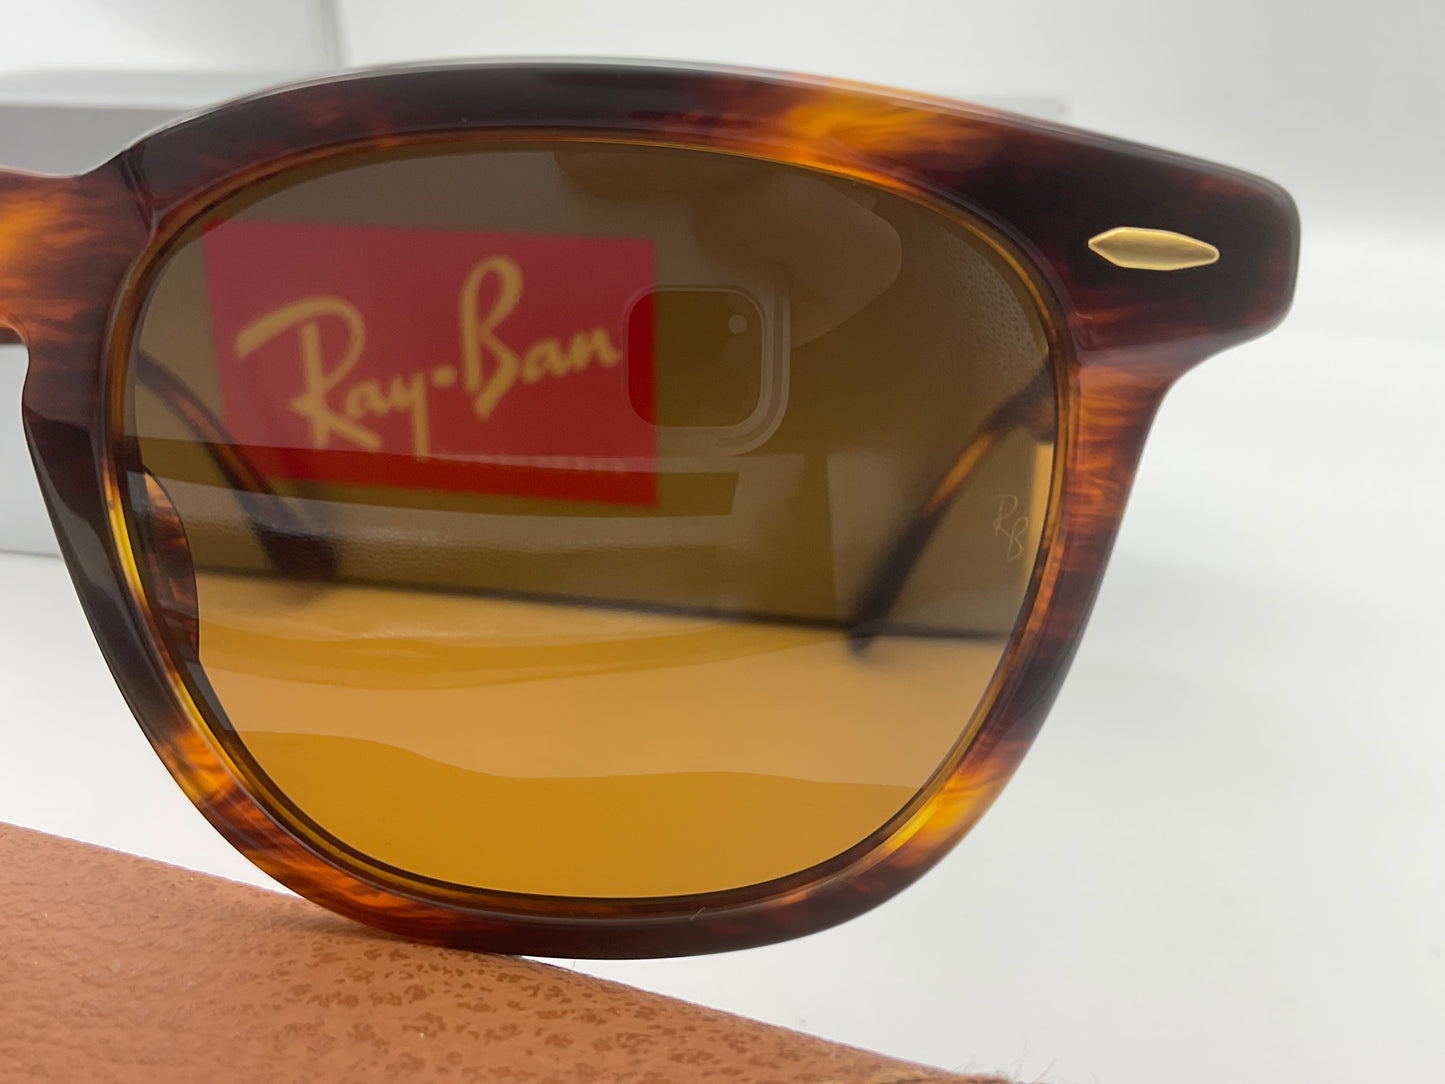 Ray Ban Hawkeye 50mm RB 2298 954/33 Stripped Havana Brown Lenses Italy NEW